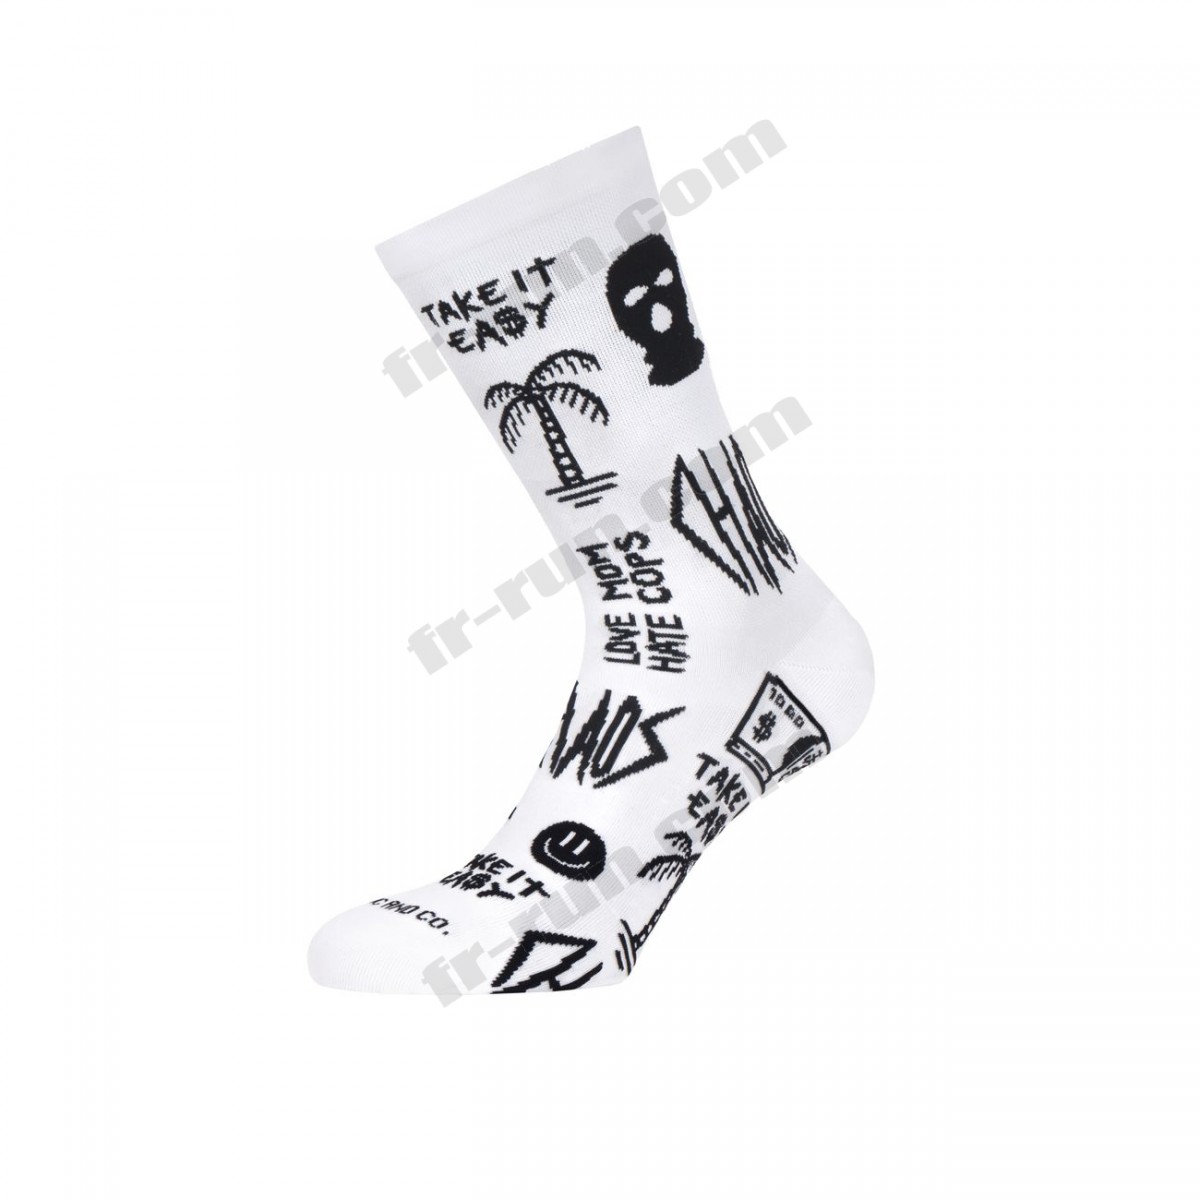 Pacific And Co/running adulte PACIFIC and CO MIAMI VICE Unisex Performance Socks ◇◇◇ Pas Cher Du Tout - -1